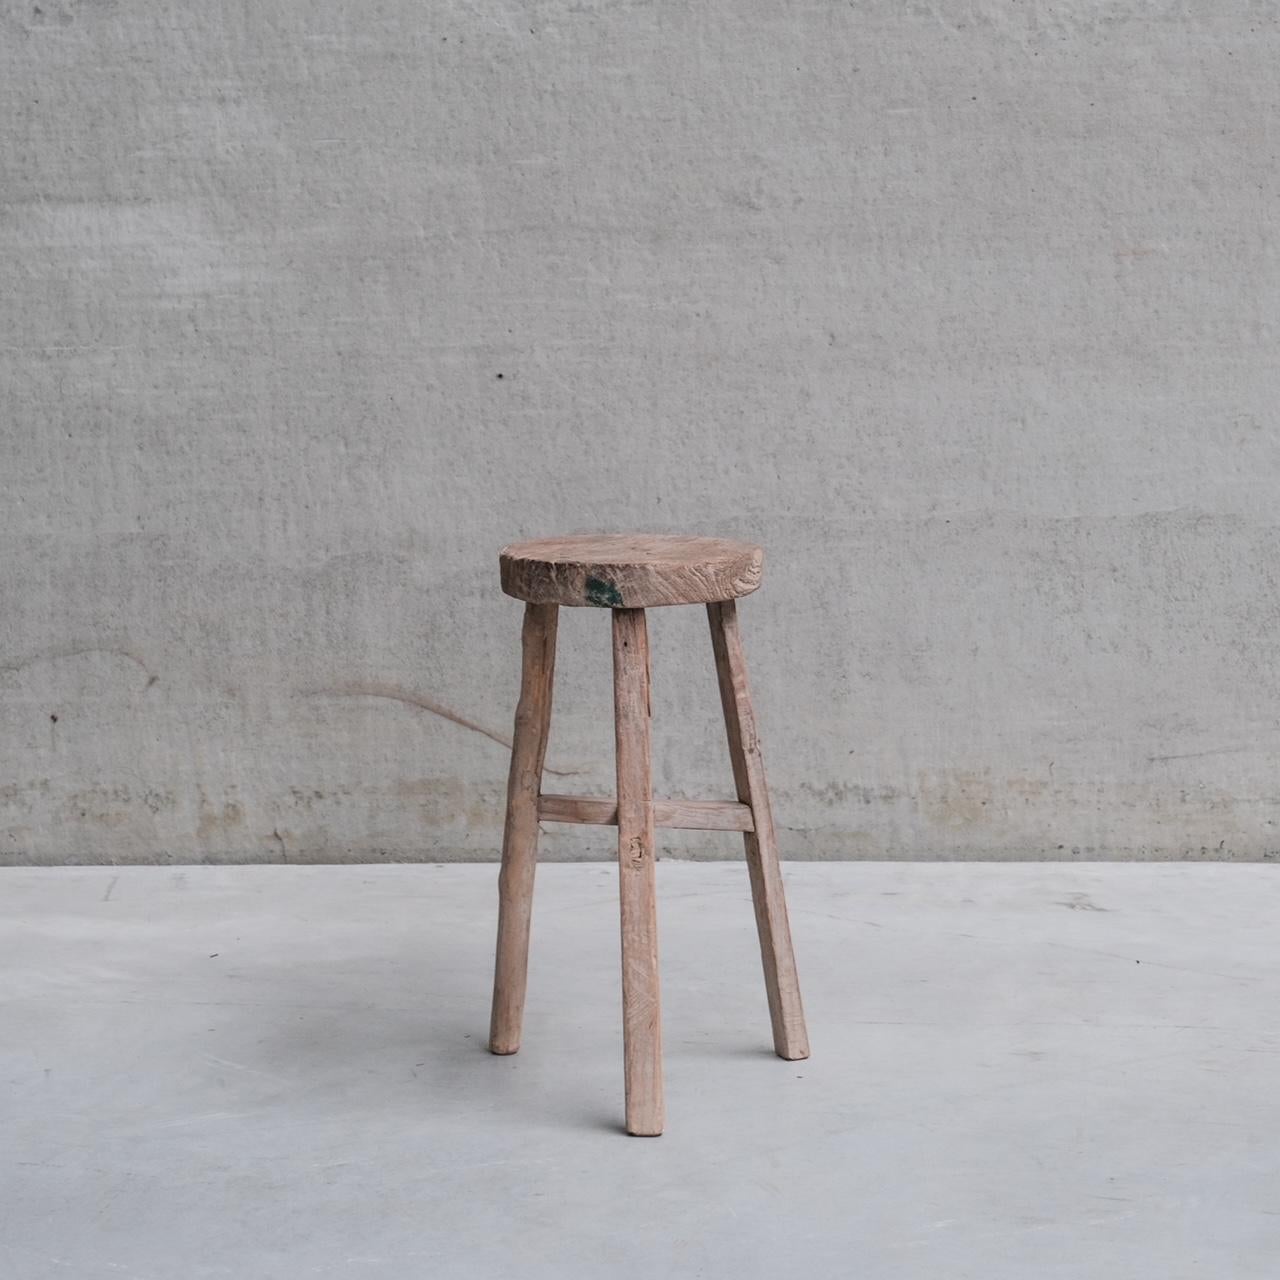 A simple tripod legged stool or side table.

France, c1940s.

Simple construction.

Wabi-Sabi esque imperfections, ideal for adding a bit of character and warmth to space.

Internal ref: 30/12/2023/017.

Good vintage condition, some scuffs and wear